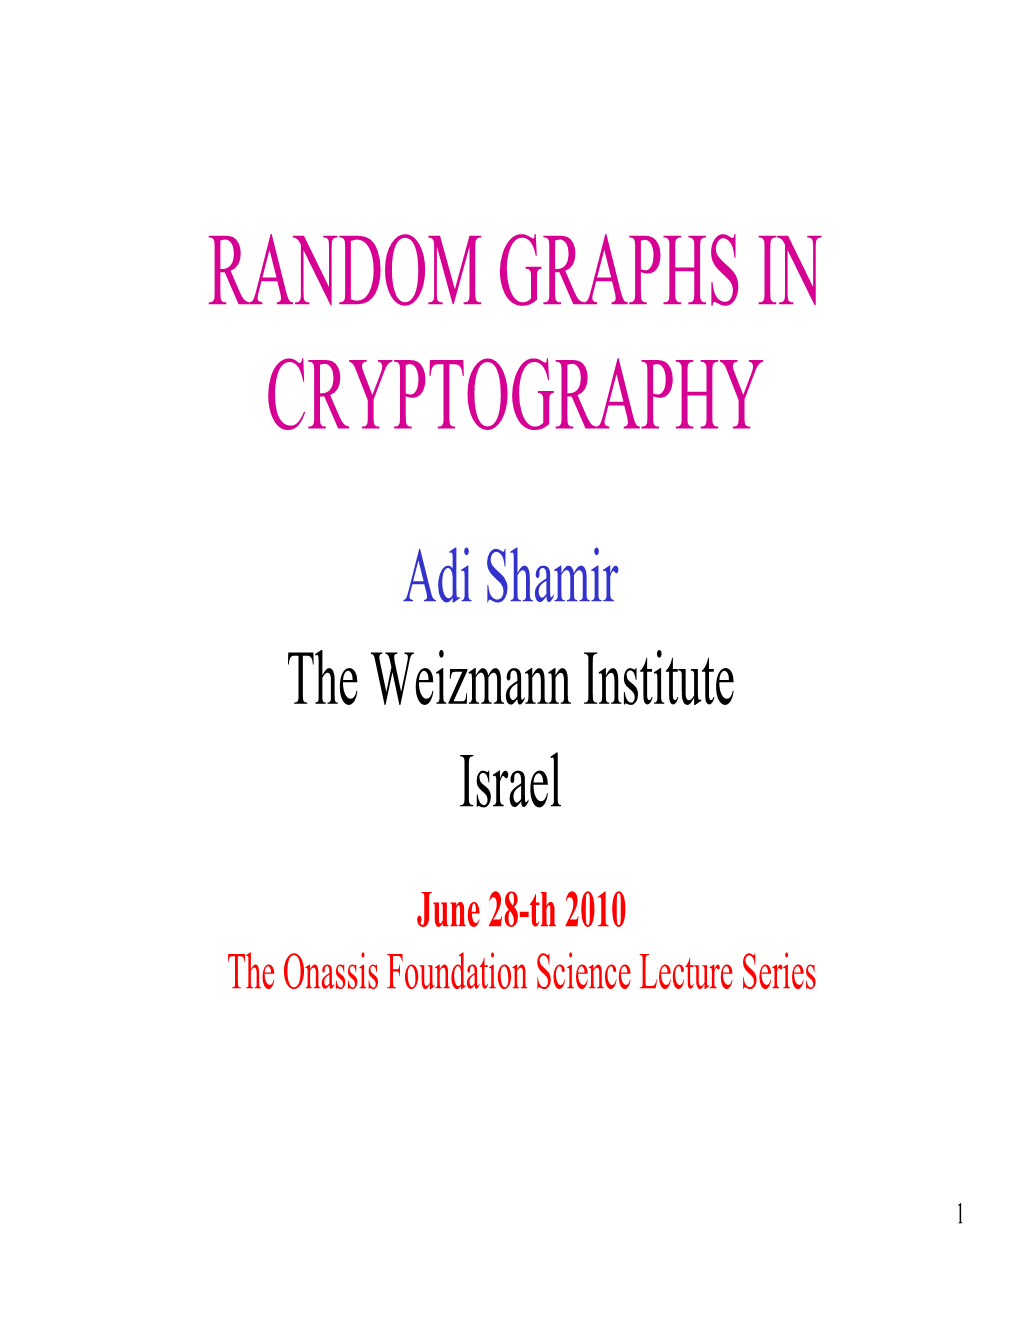 Random Graphs in Cryptography